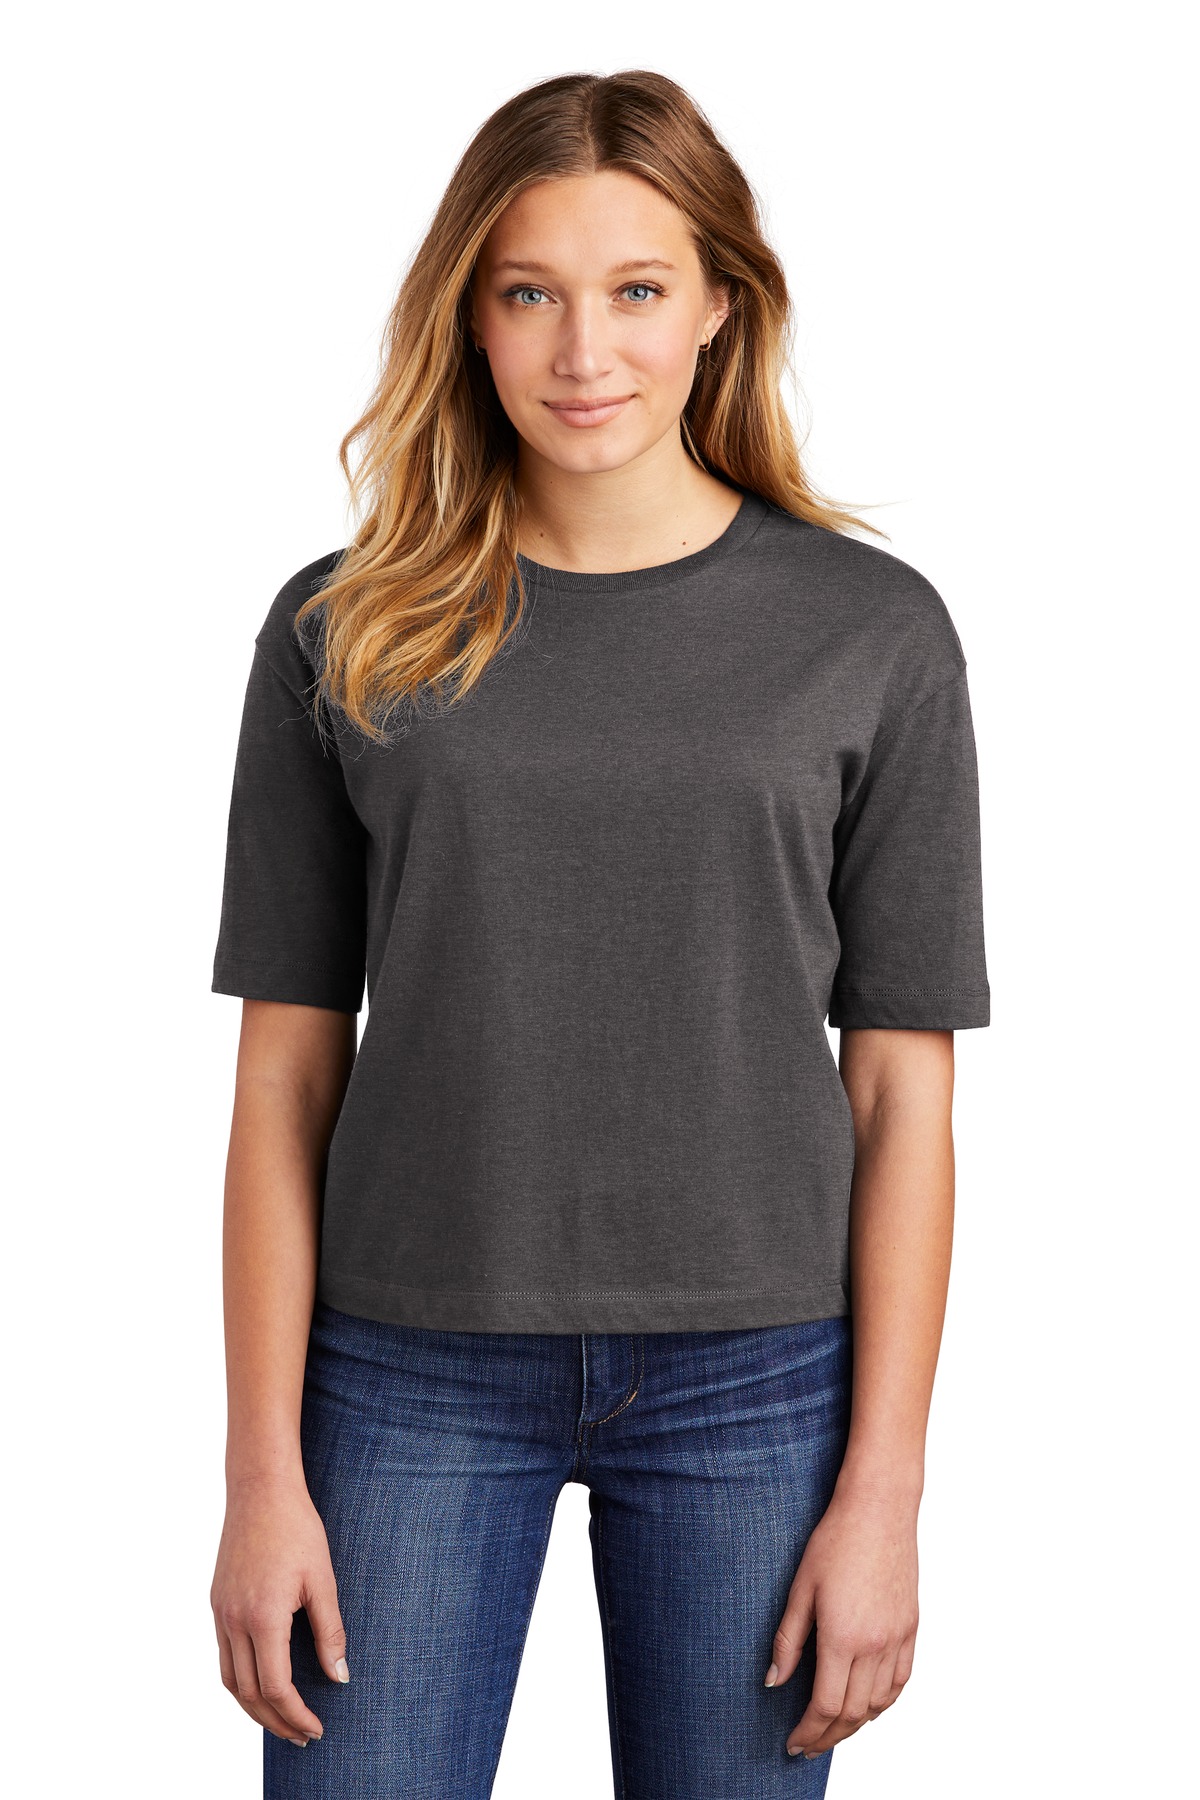 District Women''s V.I.T. Boxy Tee DT6402